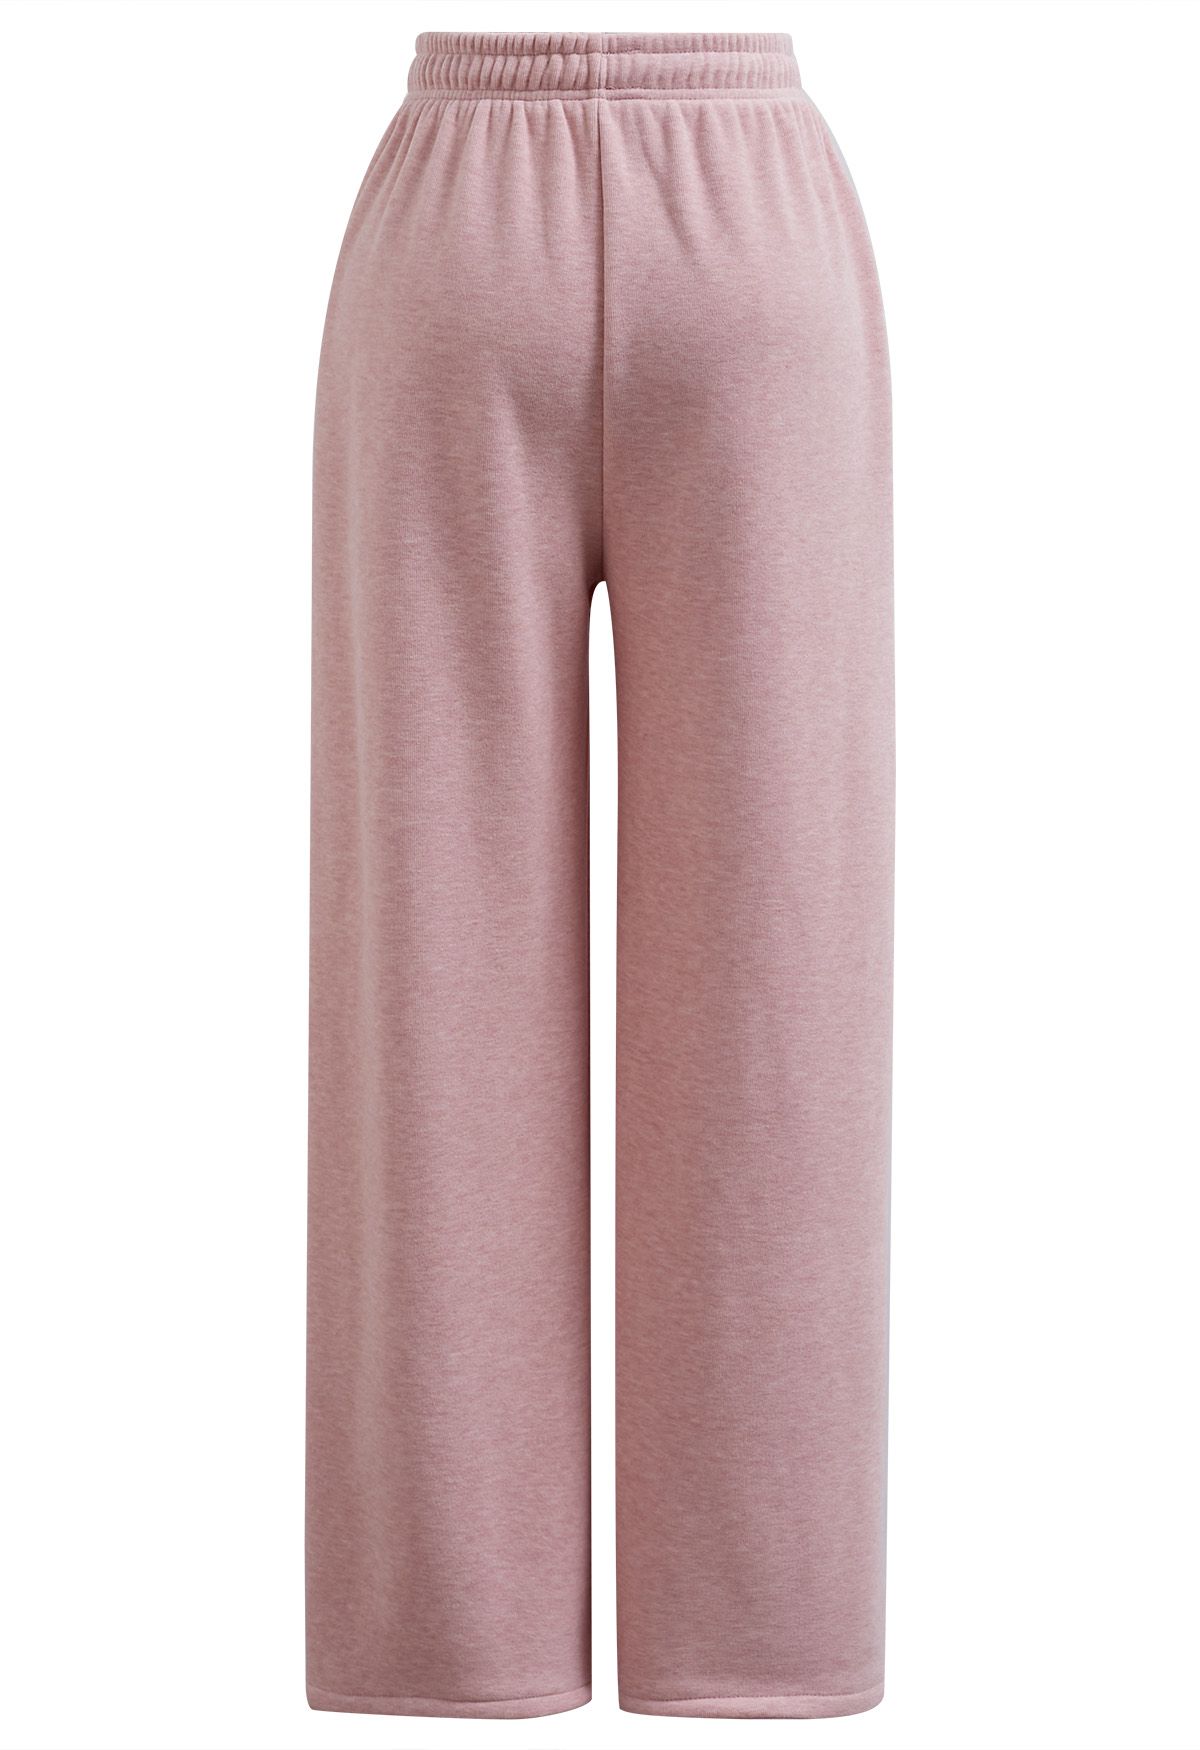 Velvet Lining Cozy Lounge Pants in Pink - Retro, Indie and Unique Fashion